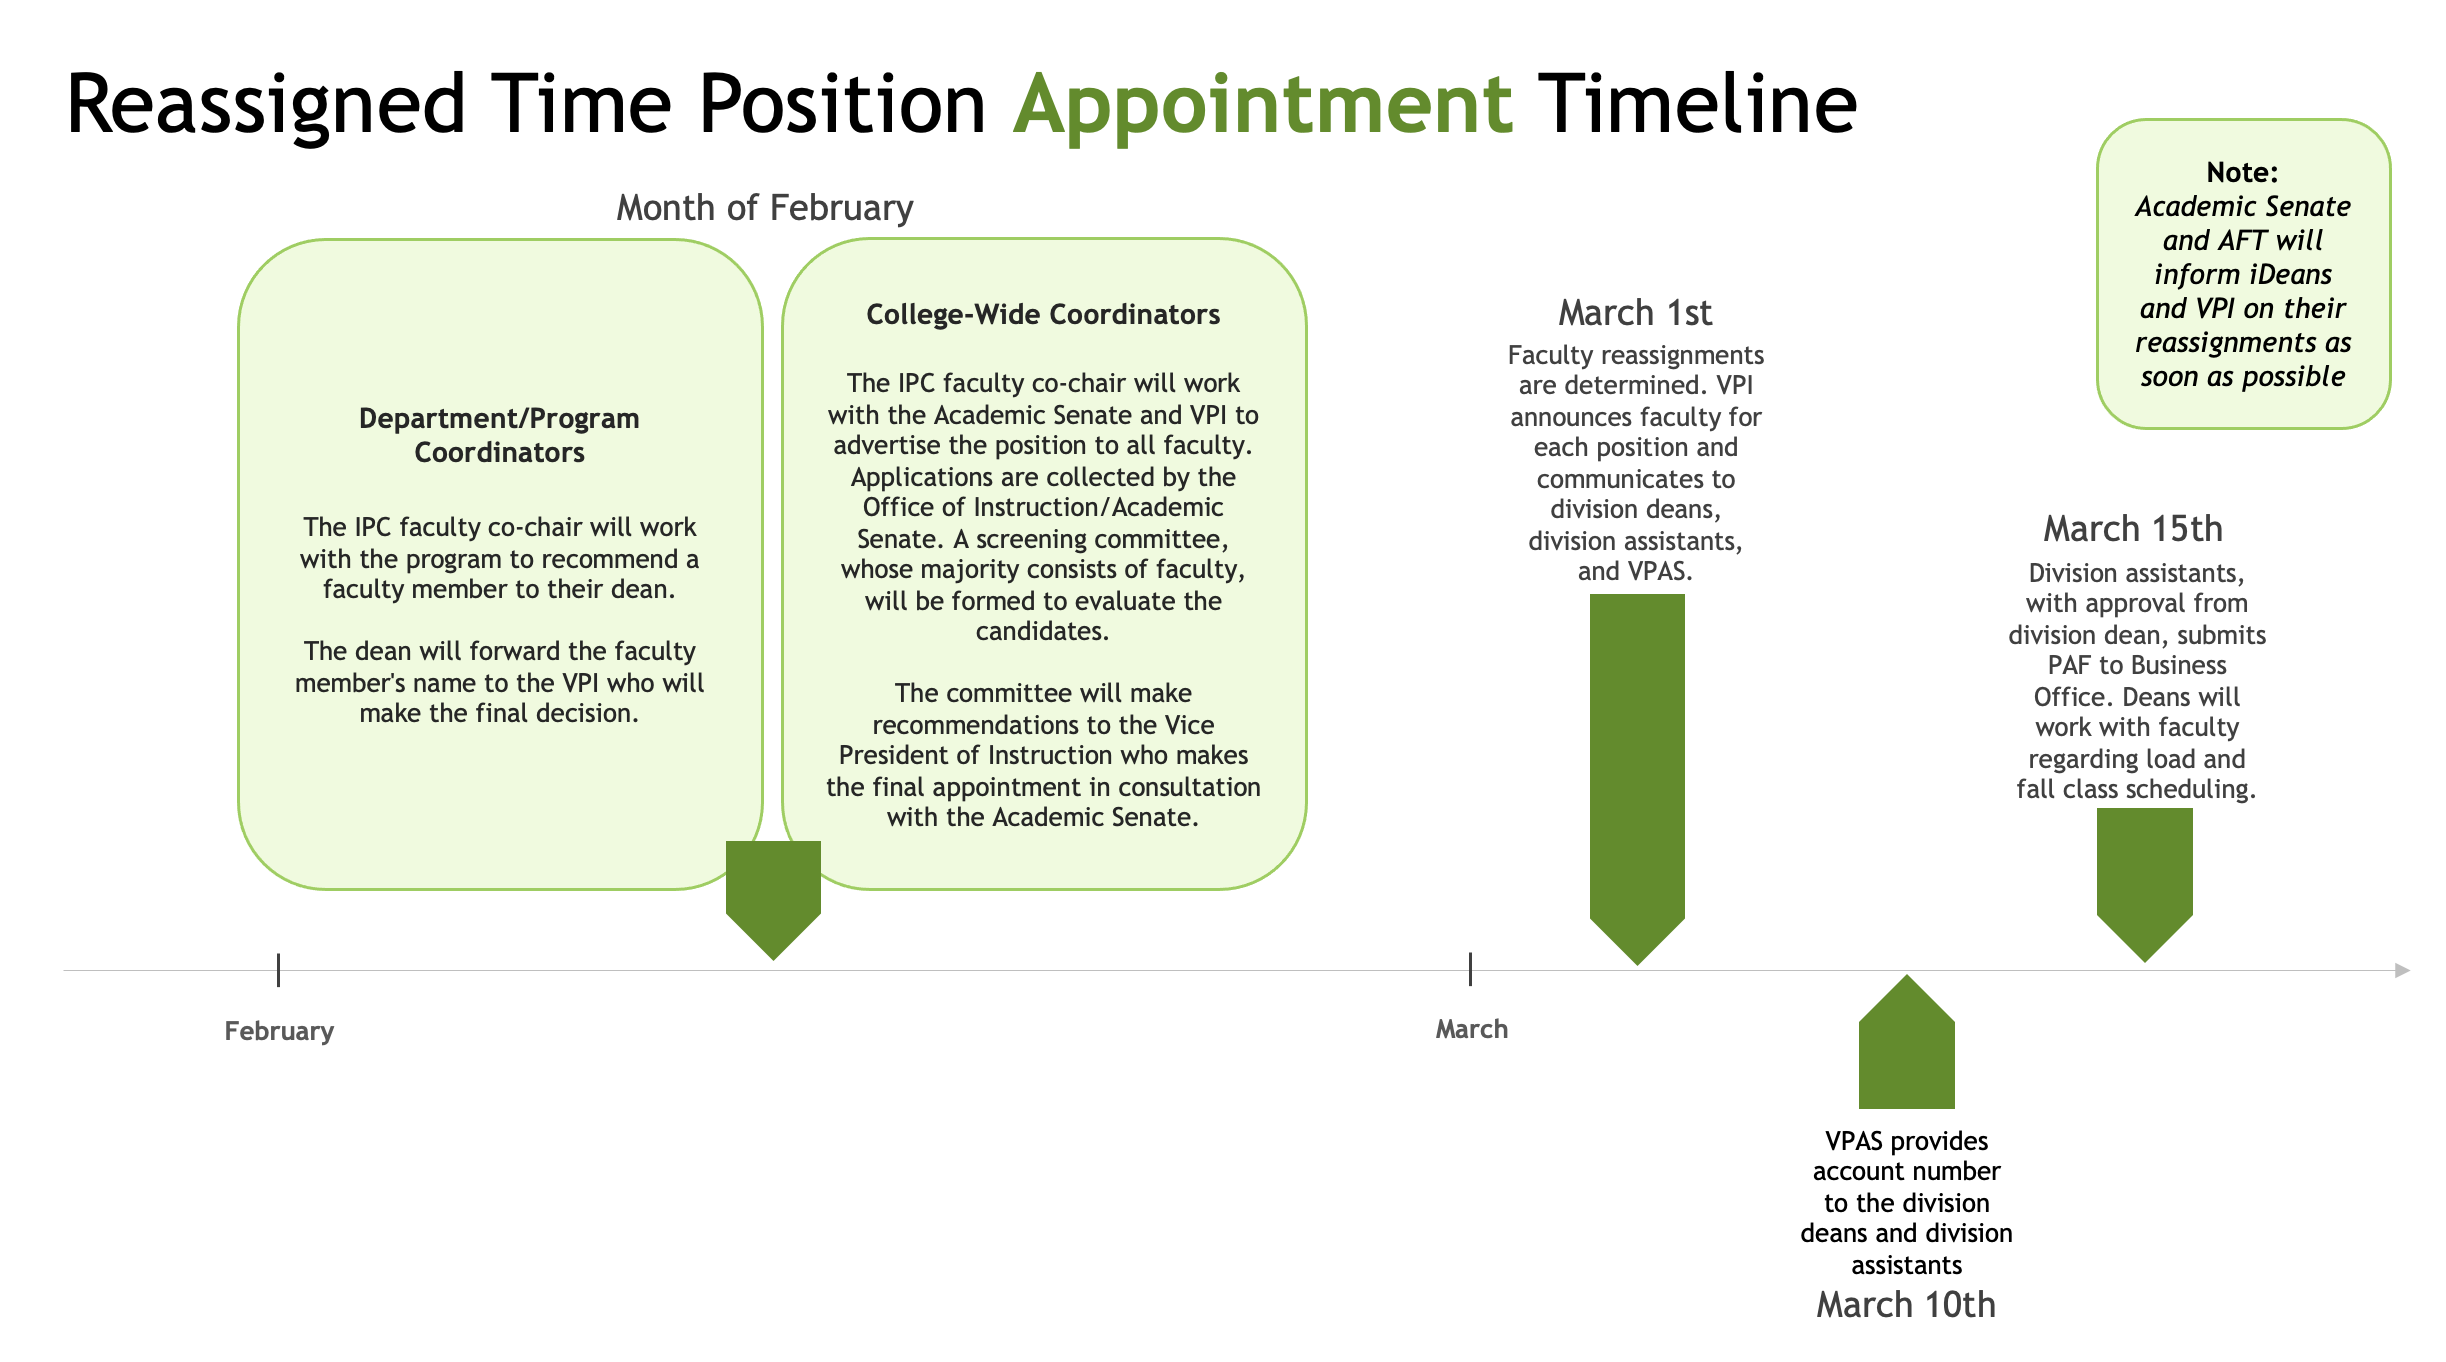 additional position specific timeline information